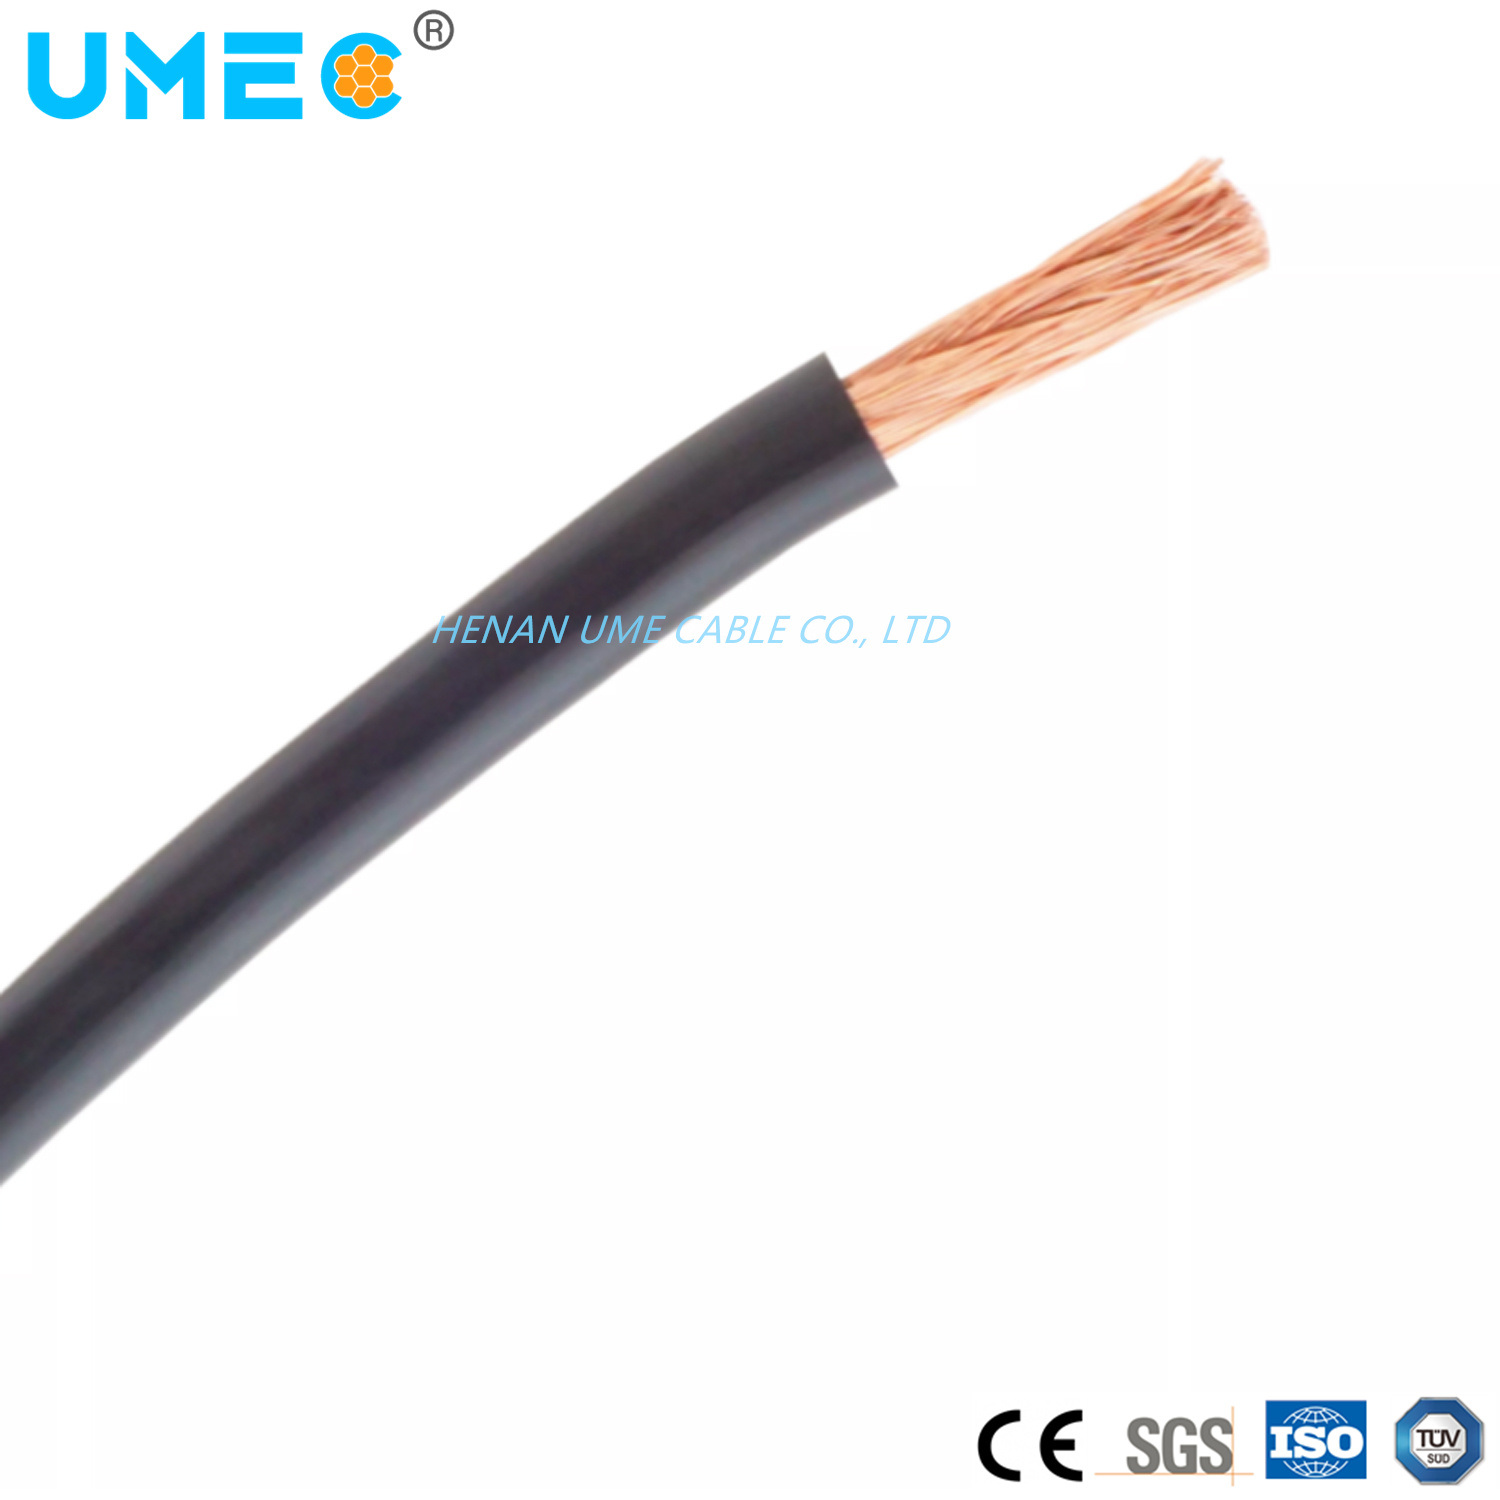 Electrical Copper Cable PVC Insulated Flexible Wire RV/ H07V-K/ H05V-K/ Nyaf Electrical Wire